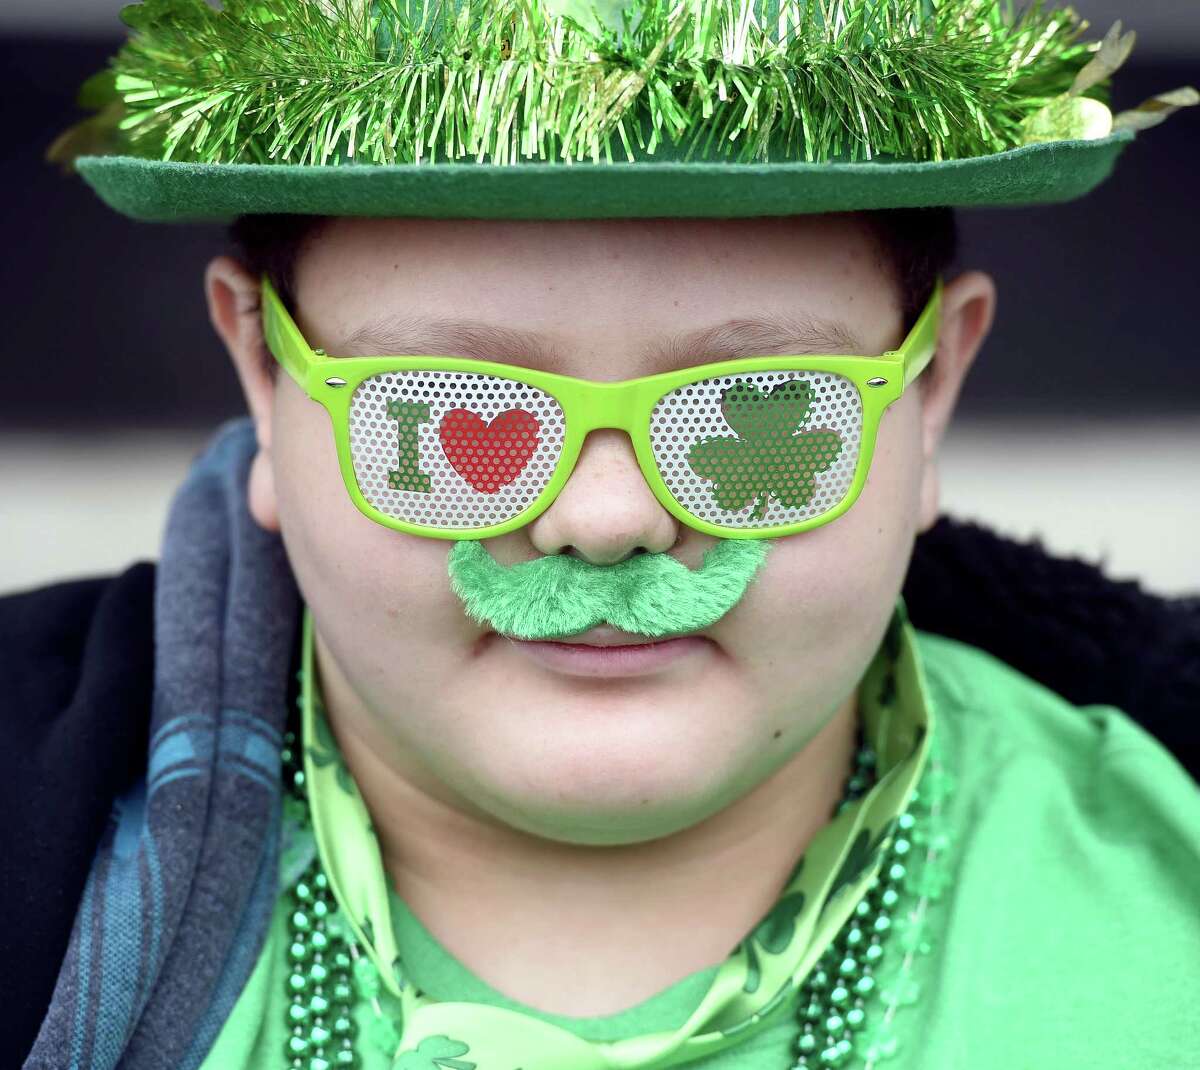 Luis Roman, 11, of New Haven watches the annual Greater New Haven St. Patrick's Day Parade on Chapel St. in New Haven in 2016.